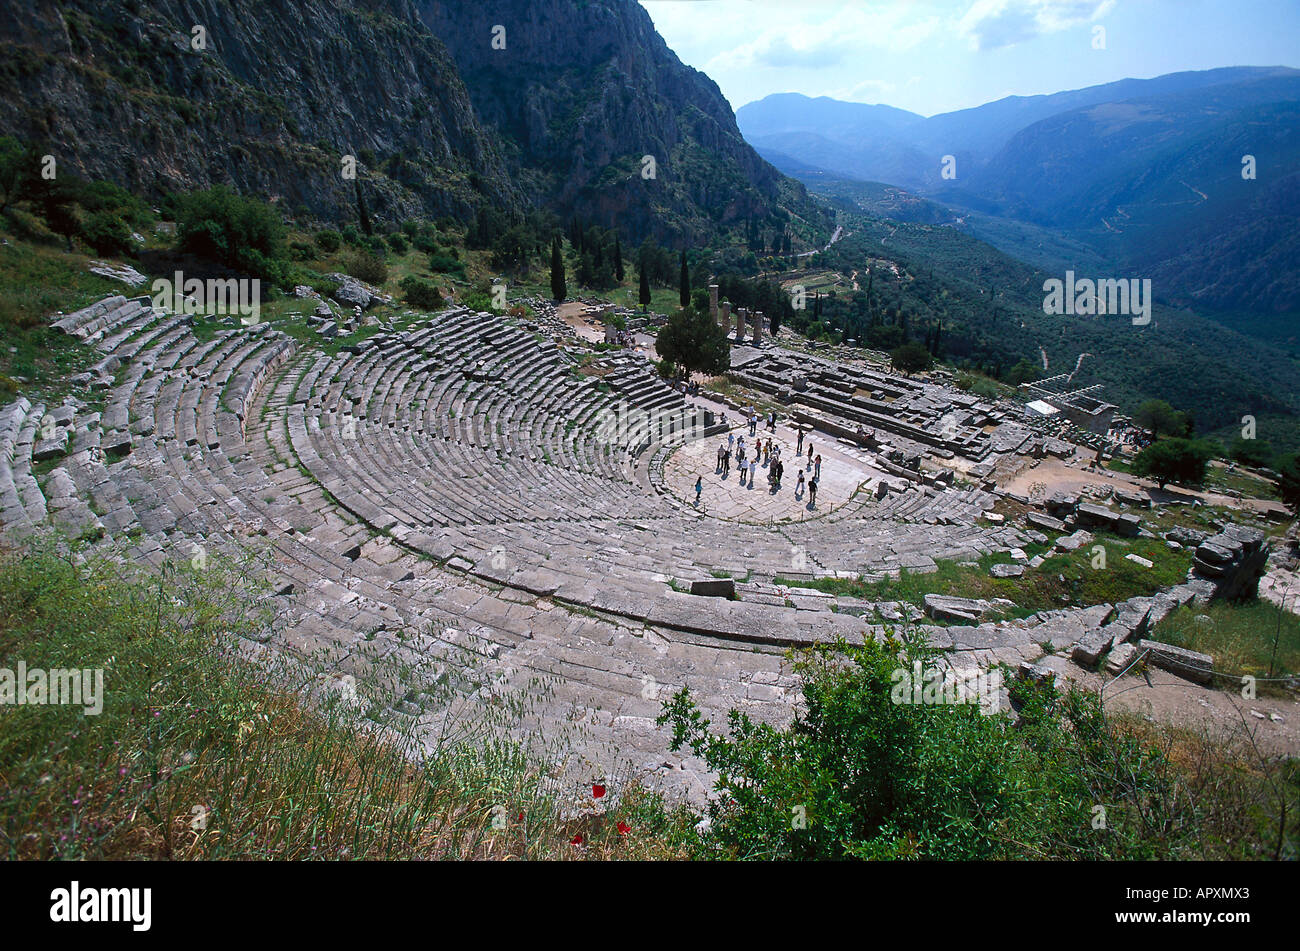 The abcient theatre and Temple of Apollo, Delphi, Peloponnese, Greece Stock Photo